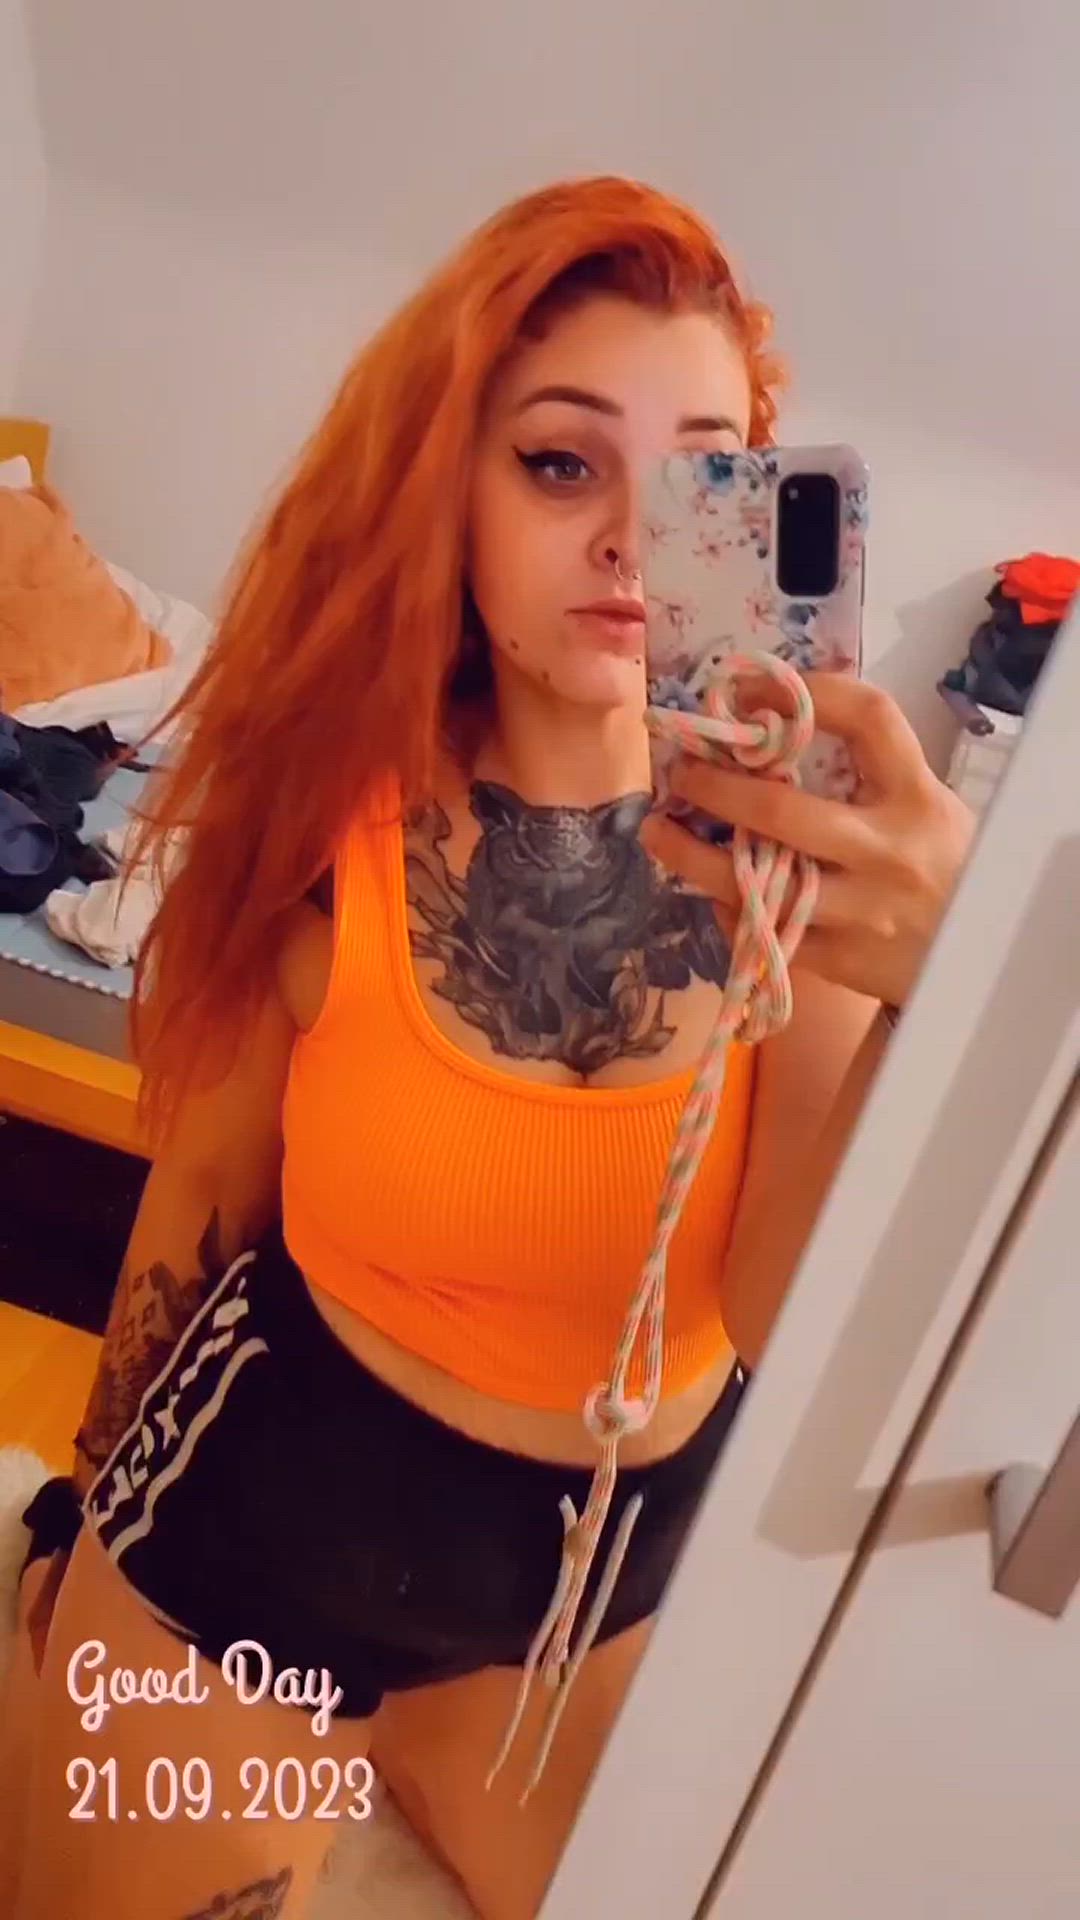 Ahegao porn video with onlyfans model redhead-66 <strong>@r.e.d.h.e.a.d_66</strong>